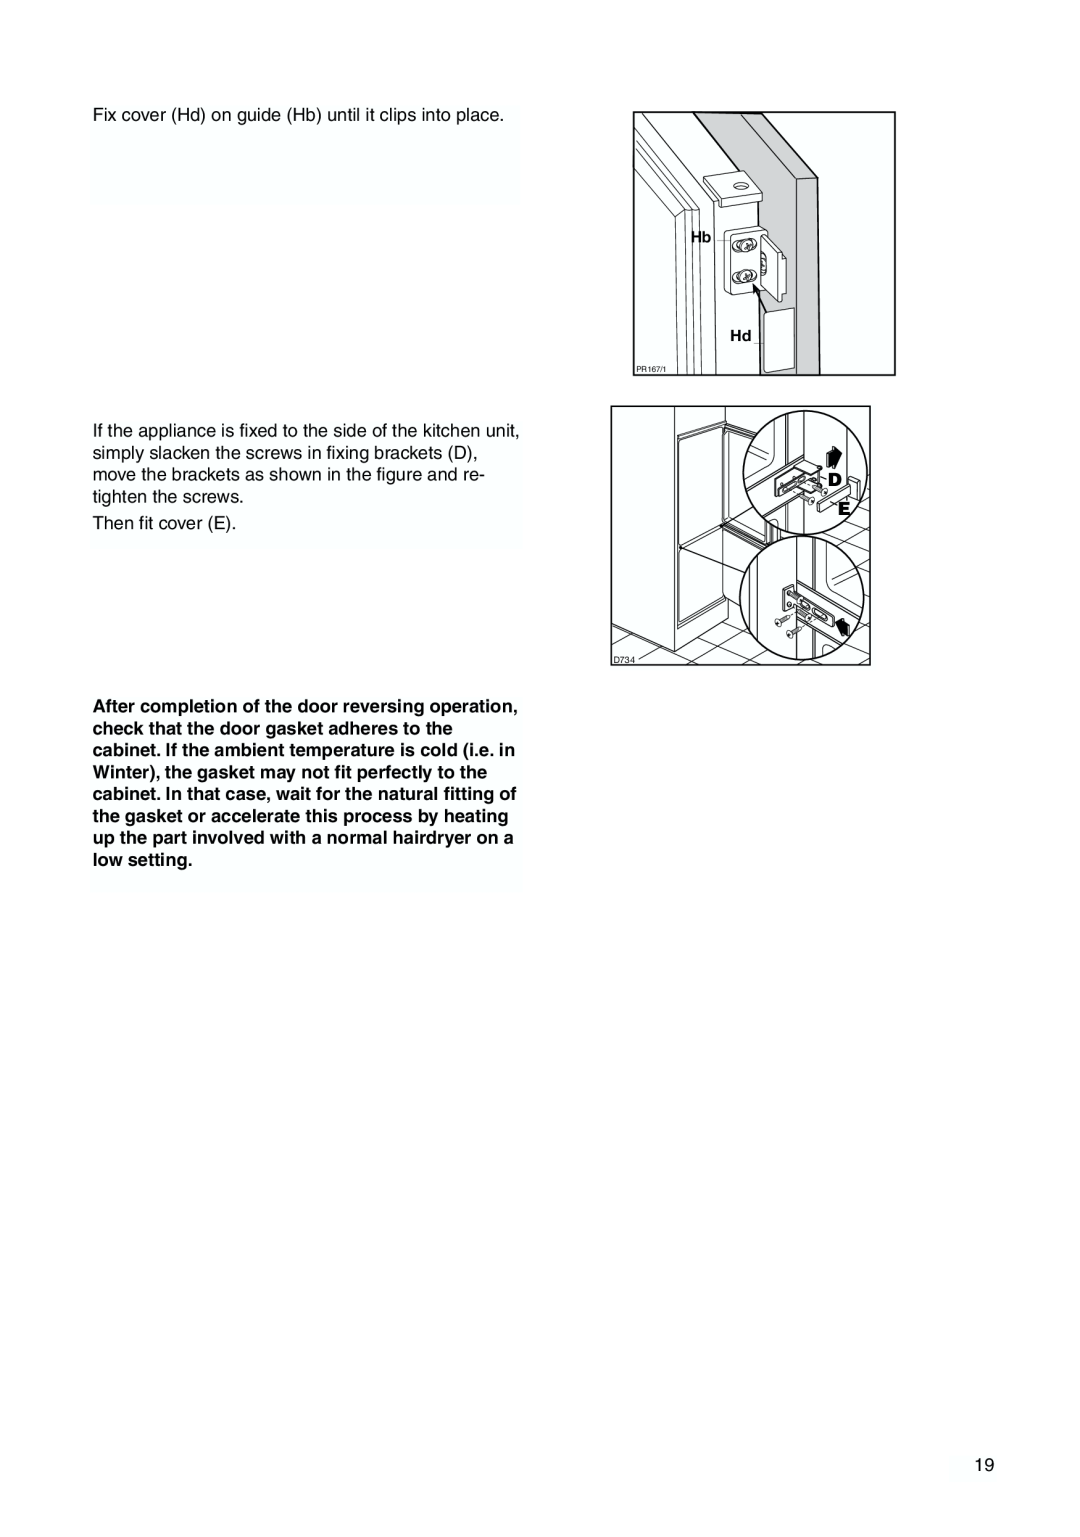 Tricity Bendix TBFF 55 installation instructions Fix cover Hd on guide Hb until it clips into place 